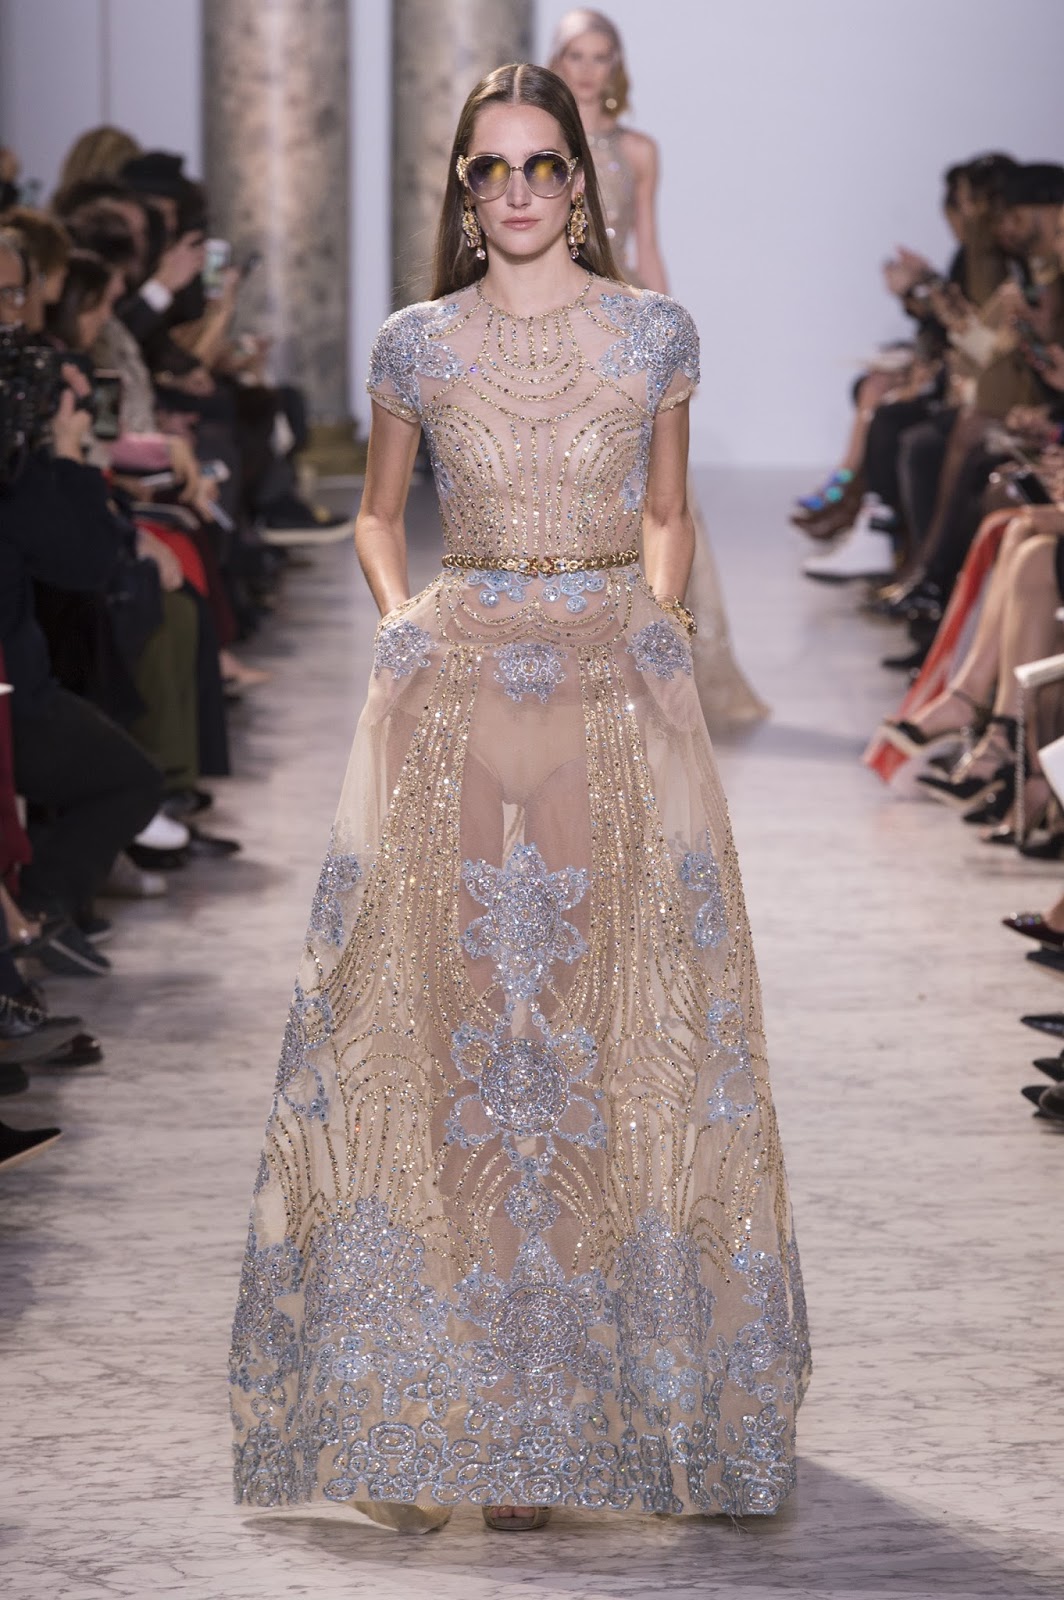 Simply Stunning: Elie Saab Haute Couture